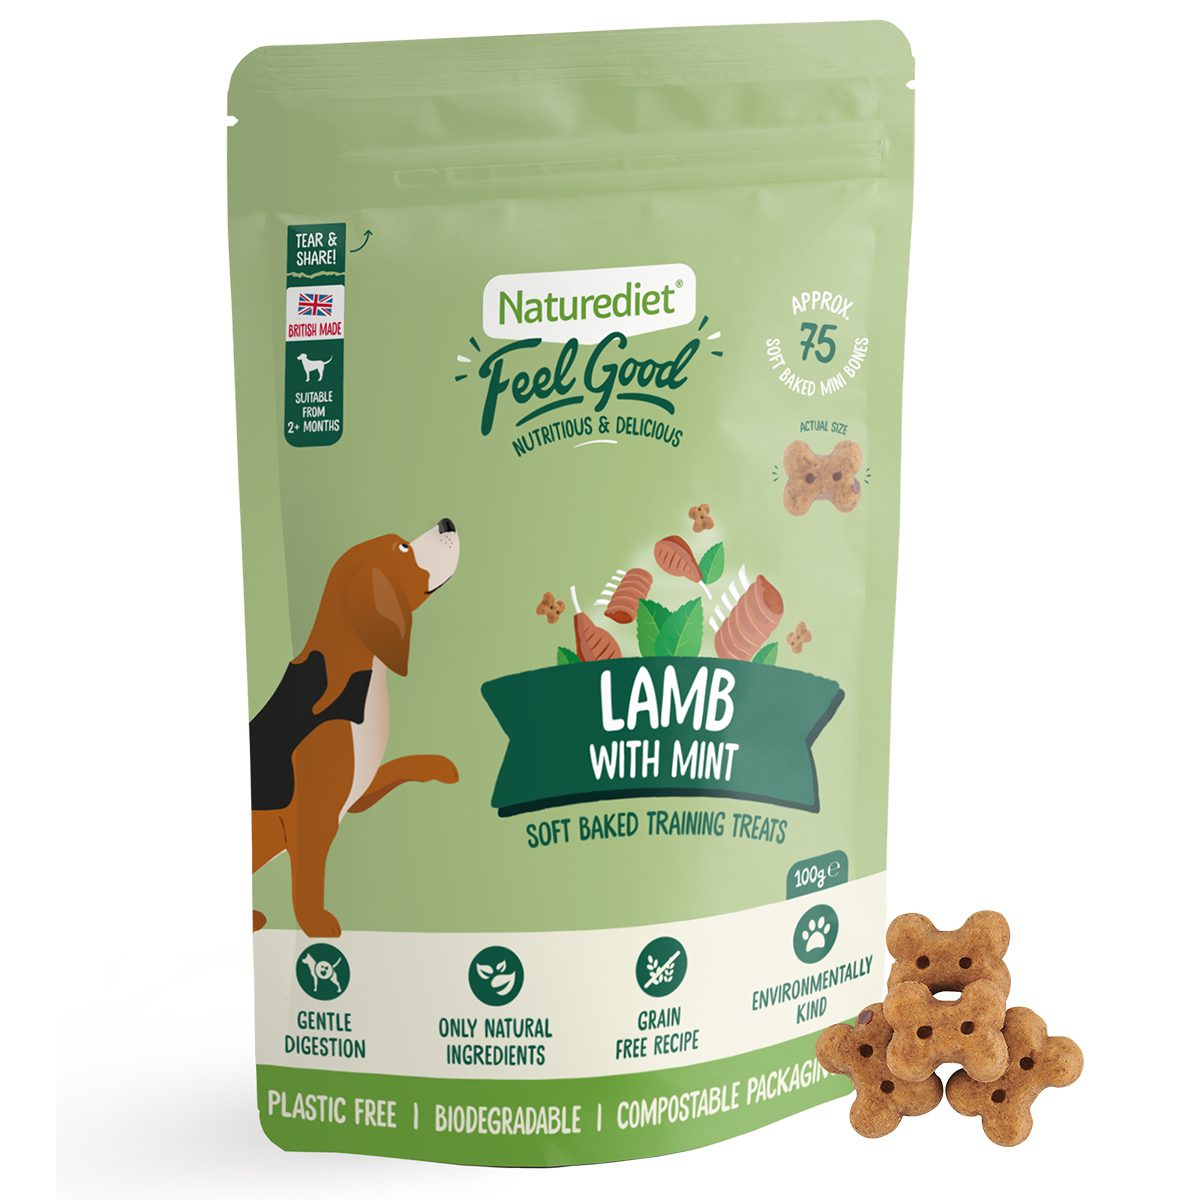 Feel Good Lamb with Mint Soft Baked Training Treats for Dogs